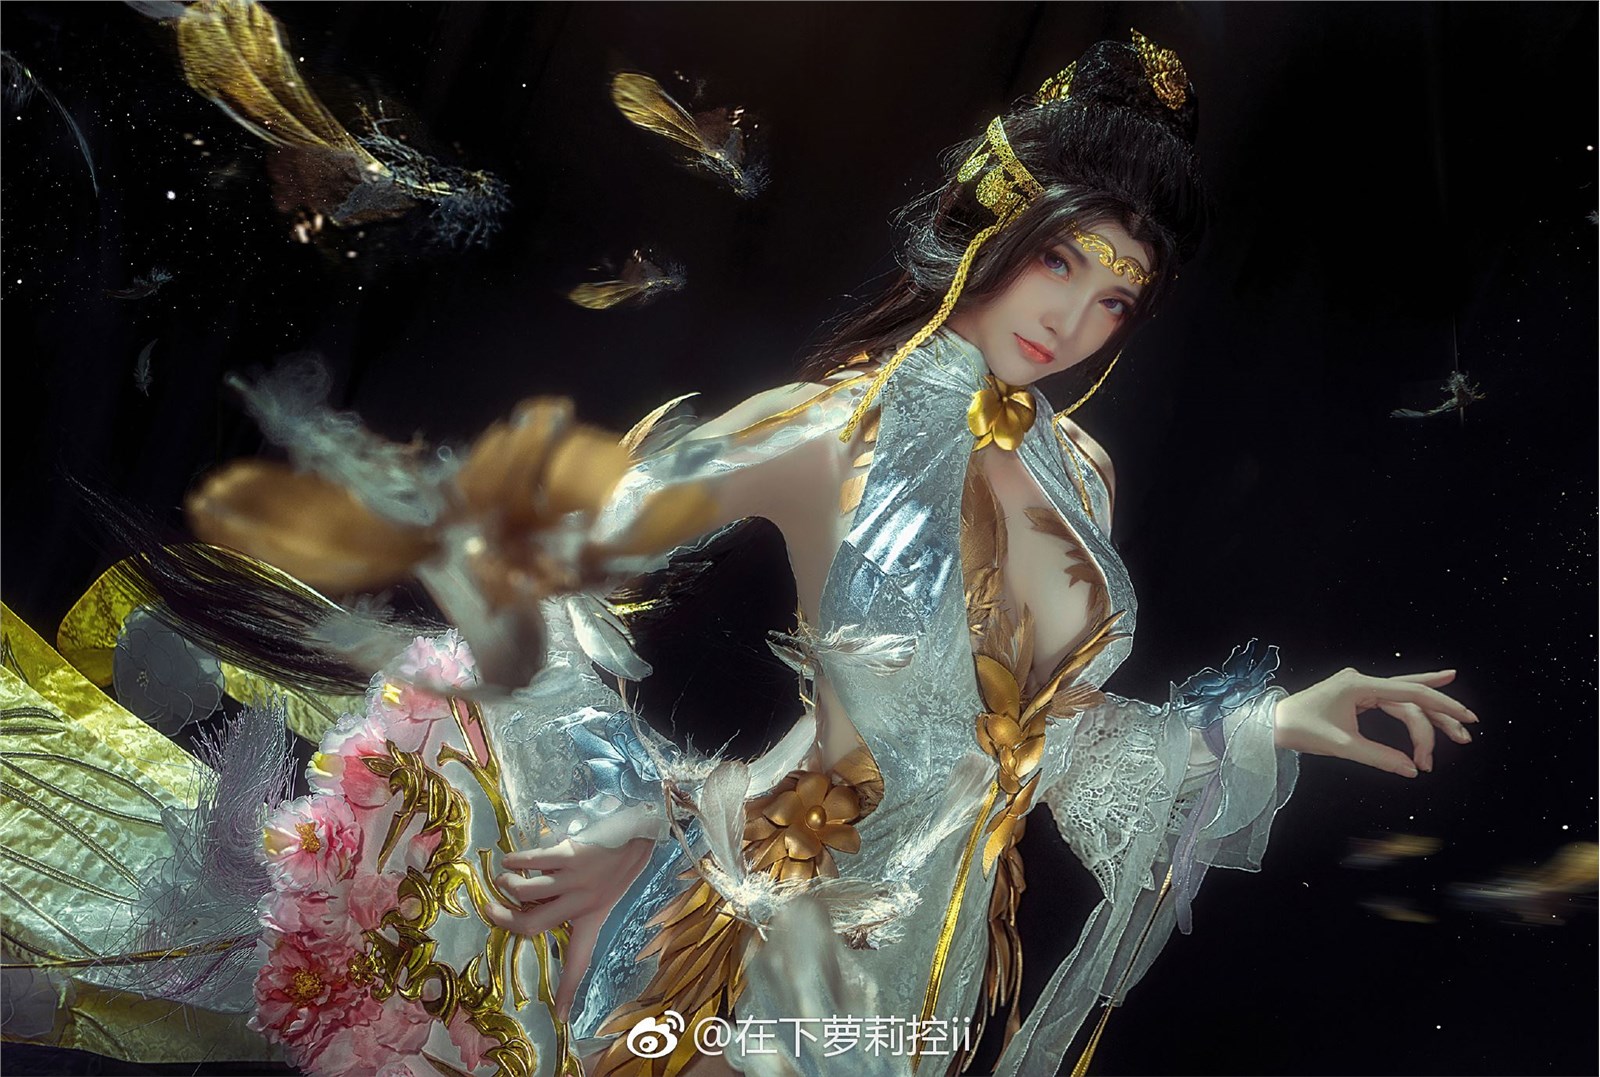 Demon King next girl control II weibo with picture 233(58)